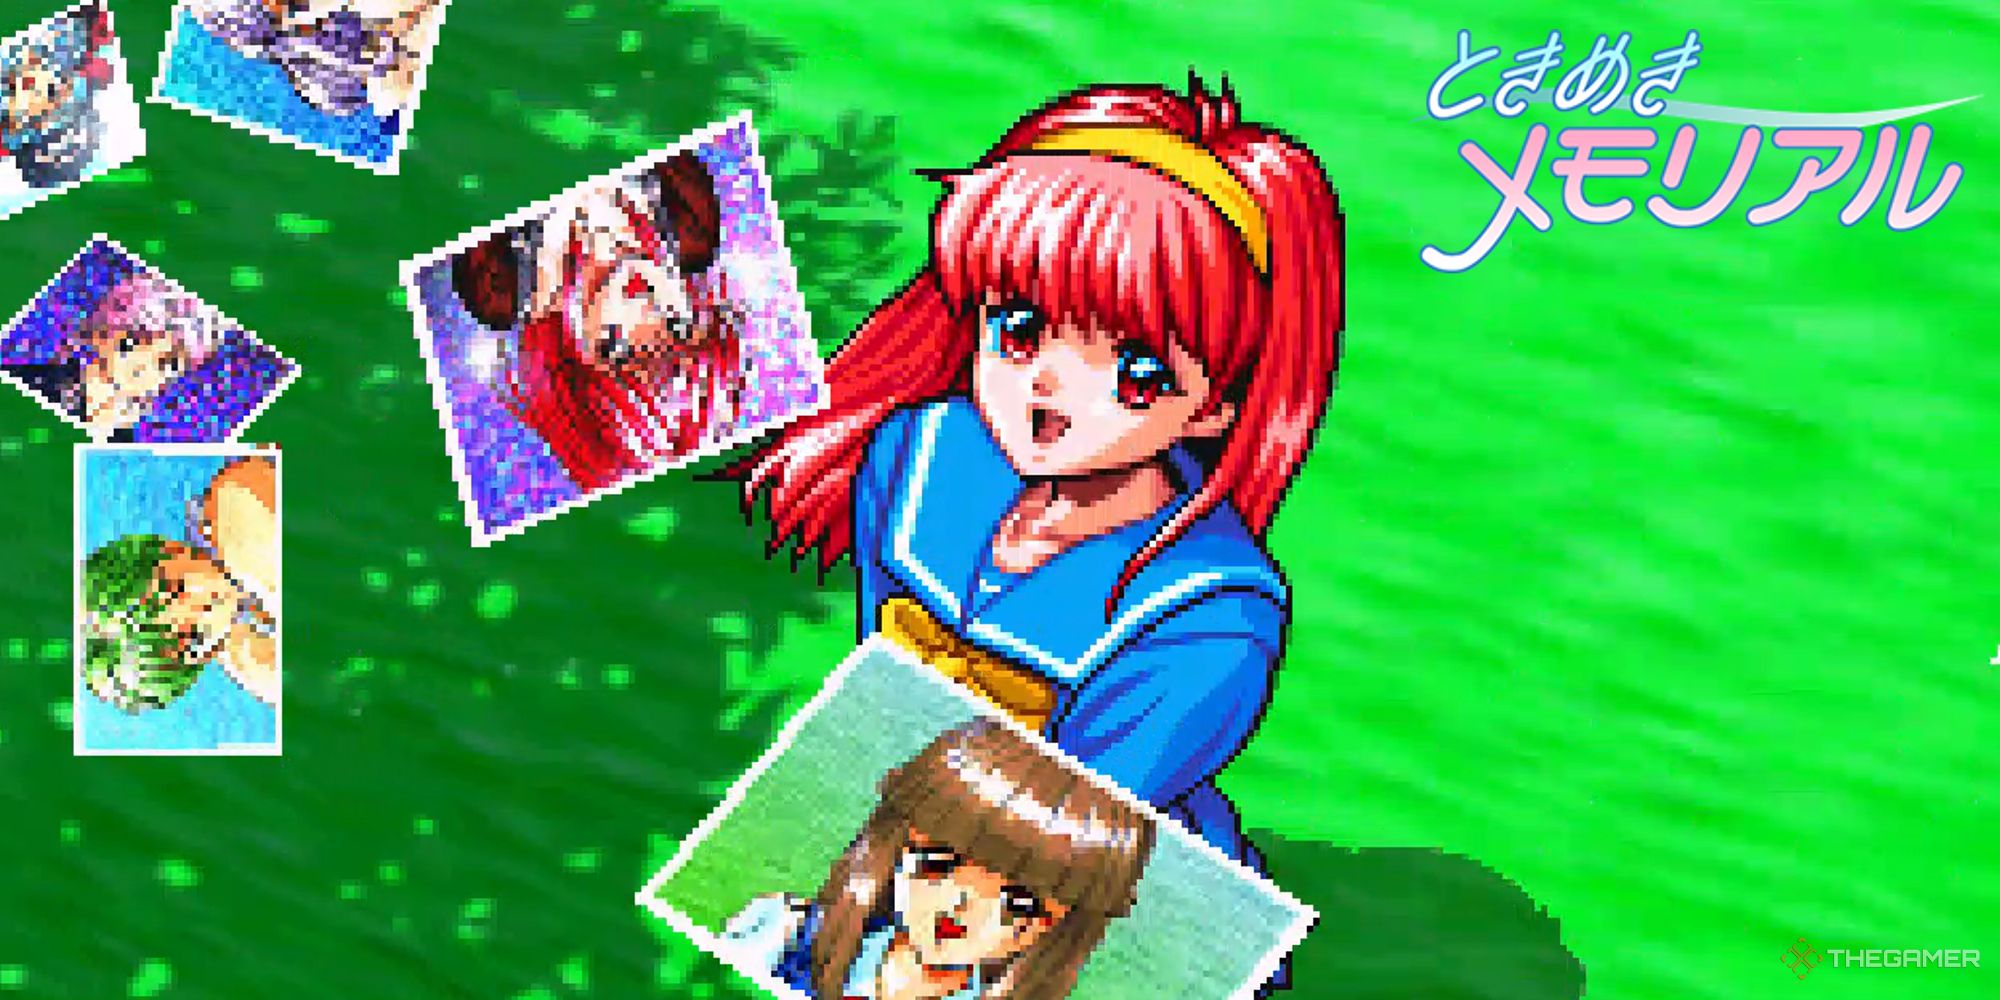 An anime girl with red hair watches pictures of other anime characters float by in the wind while dressed in a school uniform.